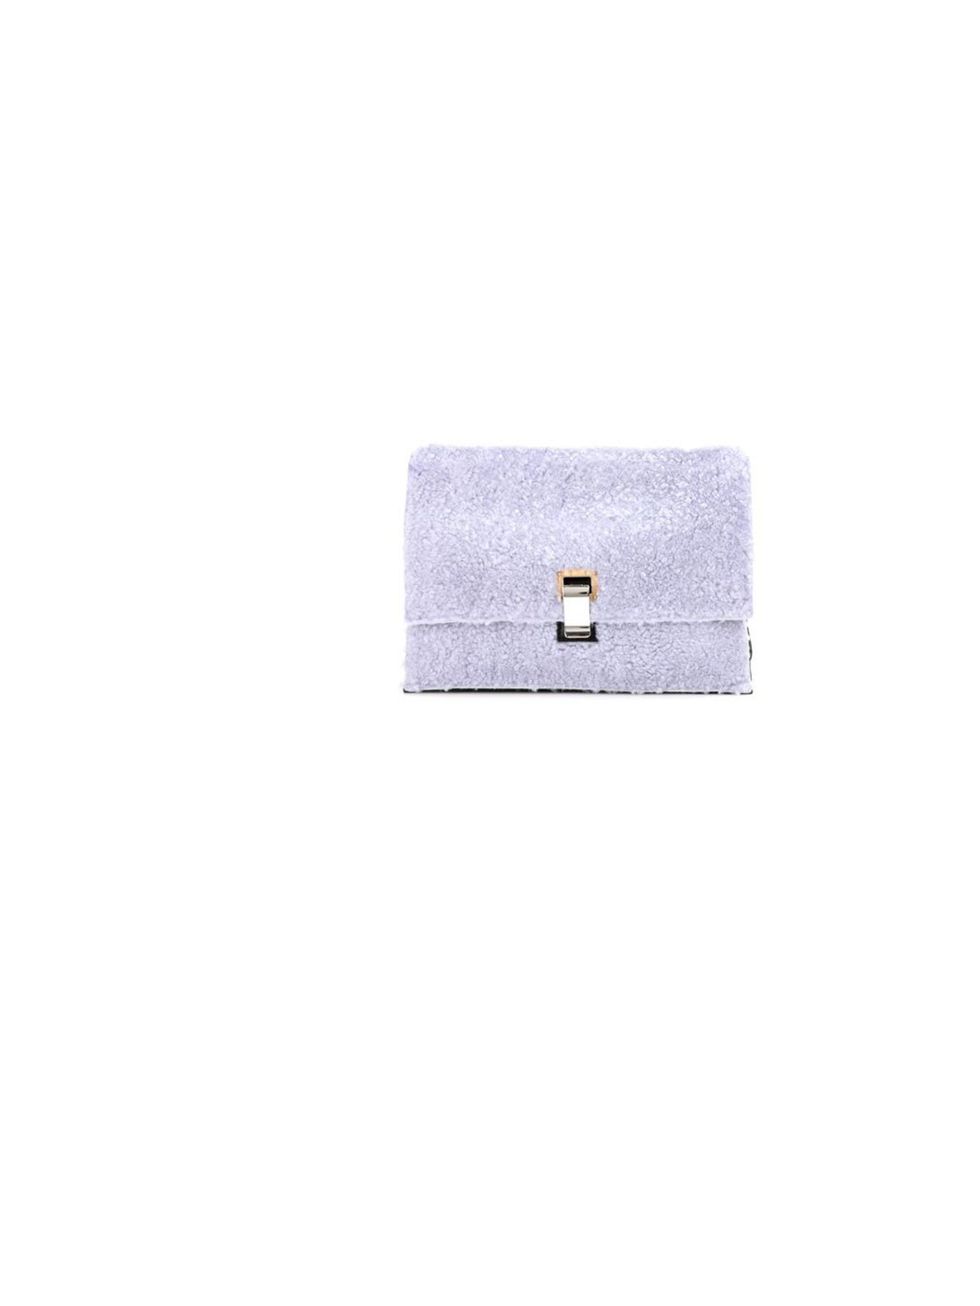 <p>Fashion feels as good as it looks for the new season, Proenza Schouler shearling clutch, £595, at <a href="http://www.mytheresa.com/en-gb/small-lunch-bag-shearling-clutch.html">mytheresa.com</a></p>